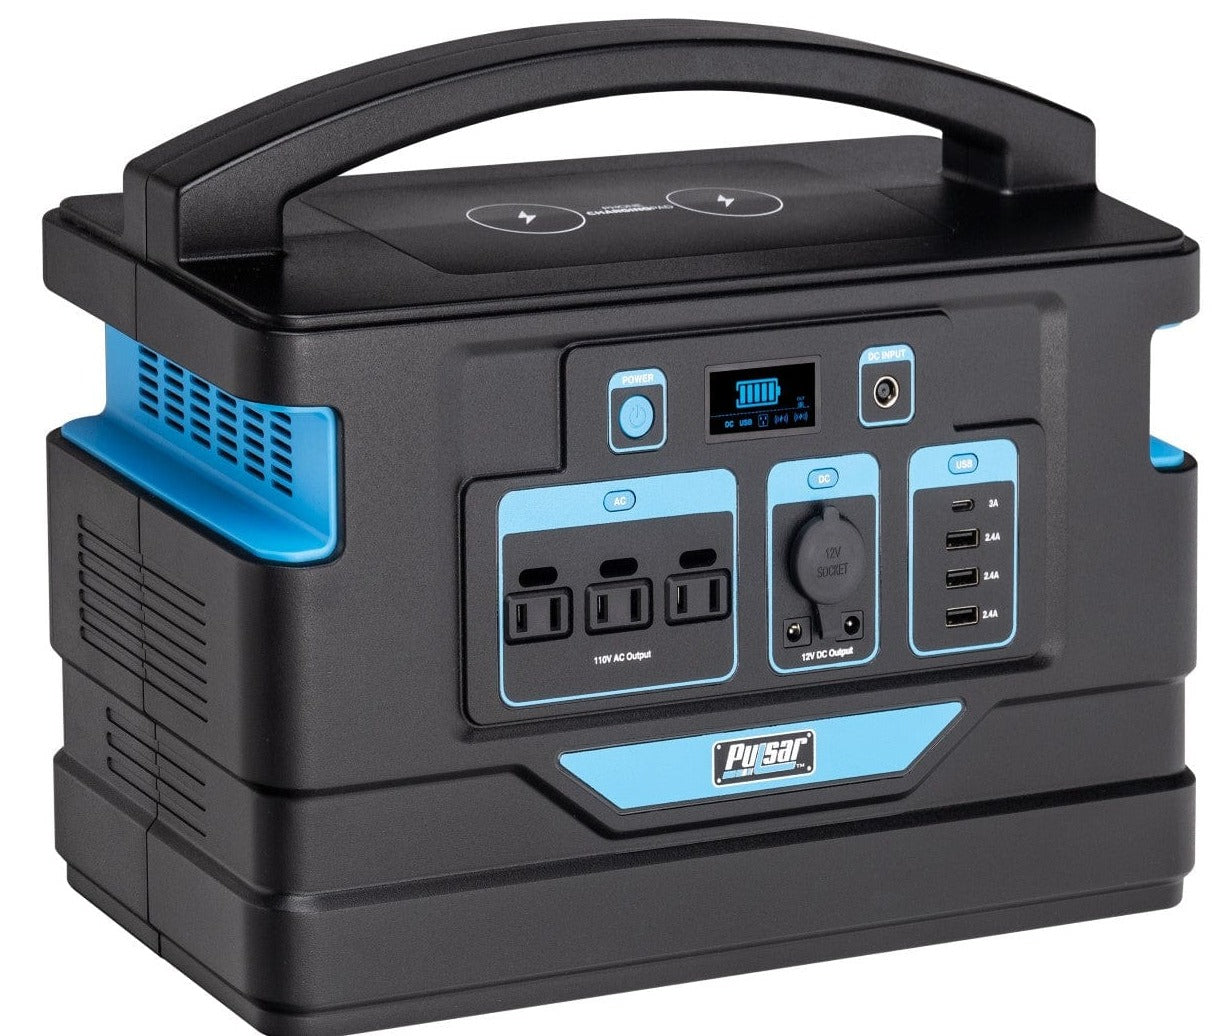 Pulsar PPS1000 888Wh Portable Power Station